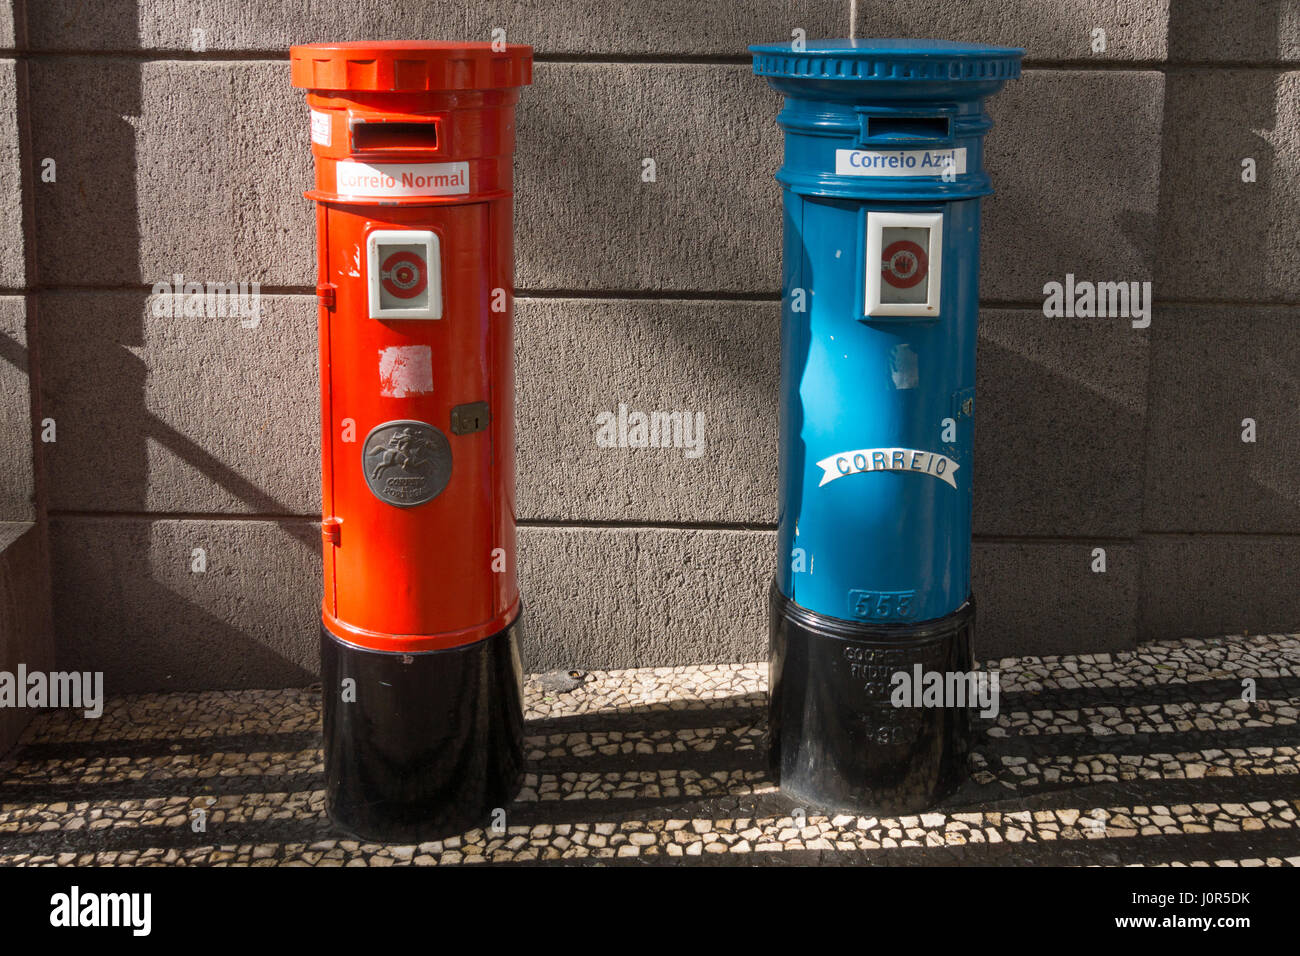 A first class (Correio Azul) and second class (Correio Normal) pillar box outside the Portugal Telecom building in Funchal, Madeira Stock Photo